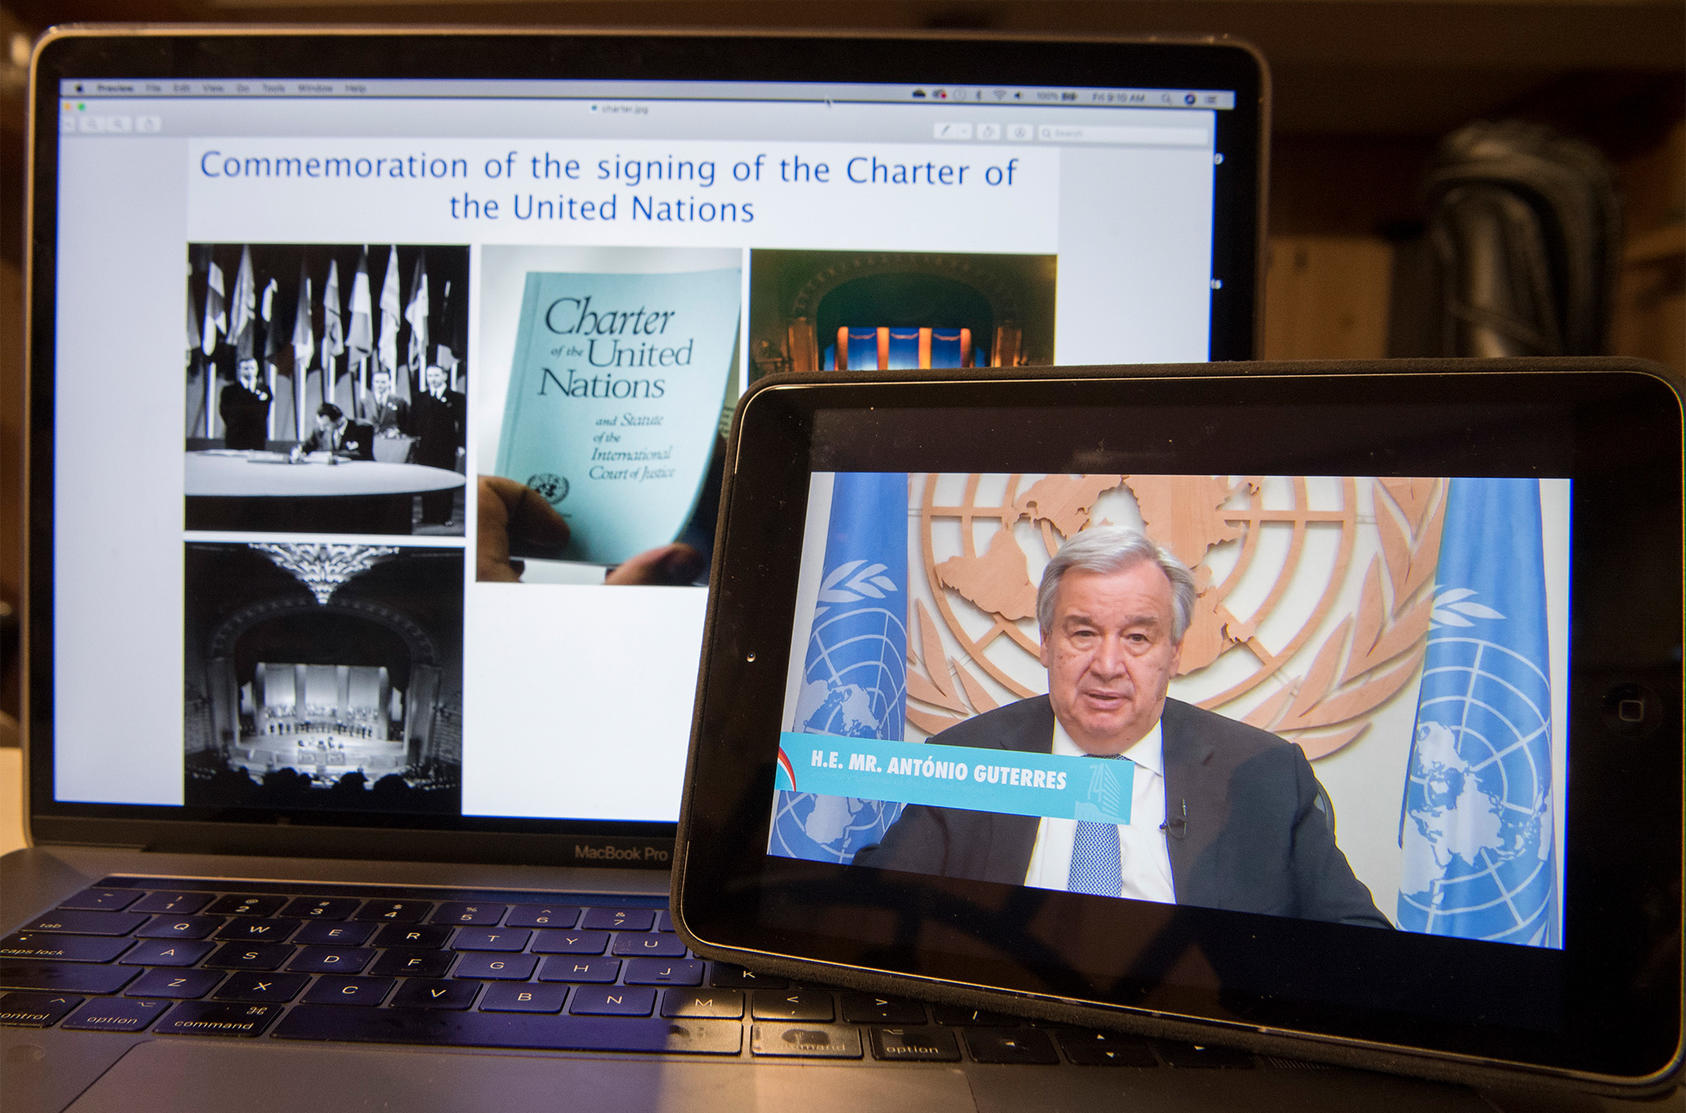 Secretary-General António Guterres addresses the virtual commemoration of the signing of the Charter of the United Nations on the occasion of U.N. Charter Day. (U.N. Photo/Eskinder Debebe)